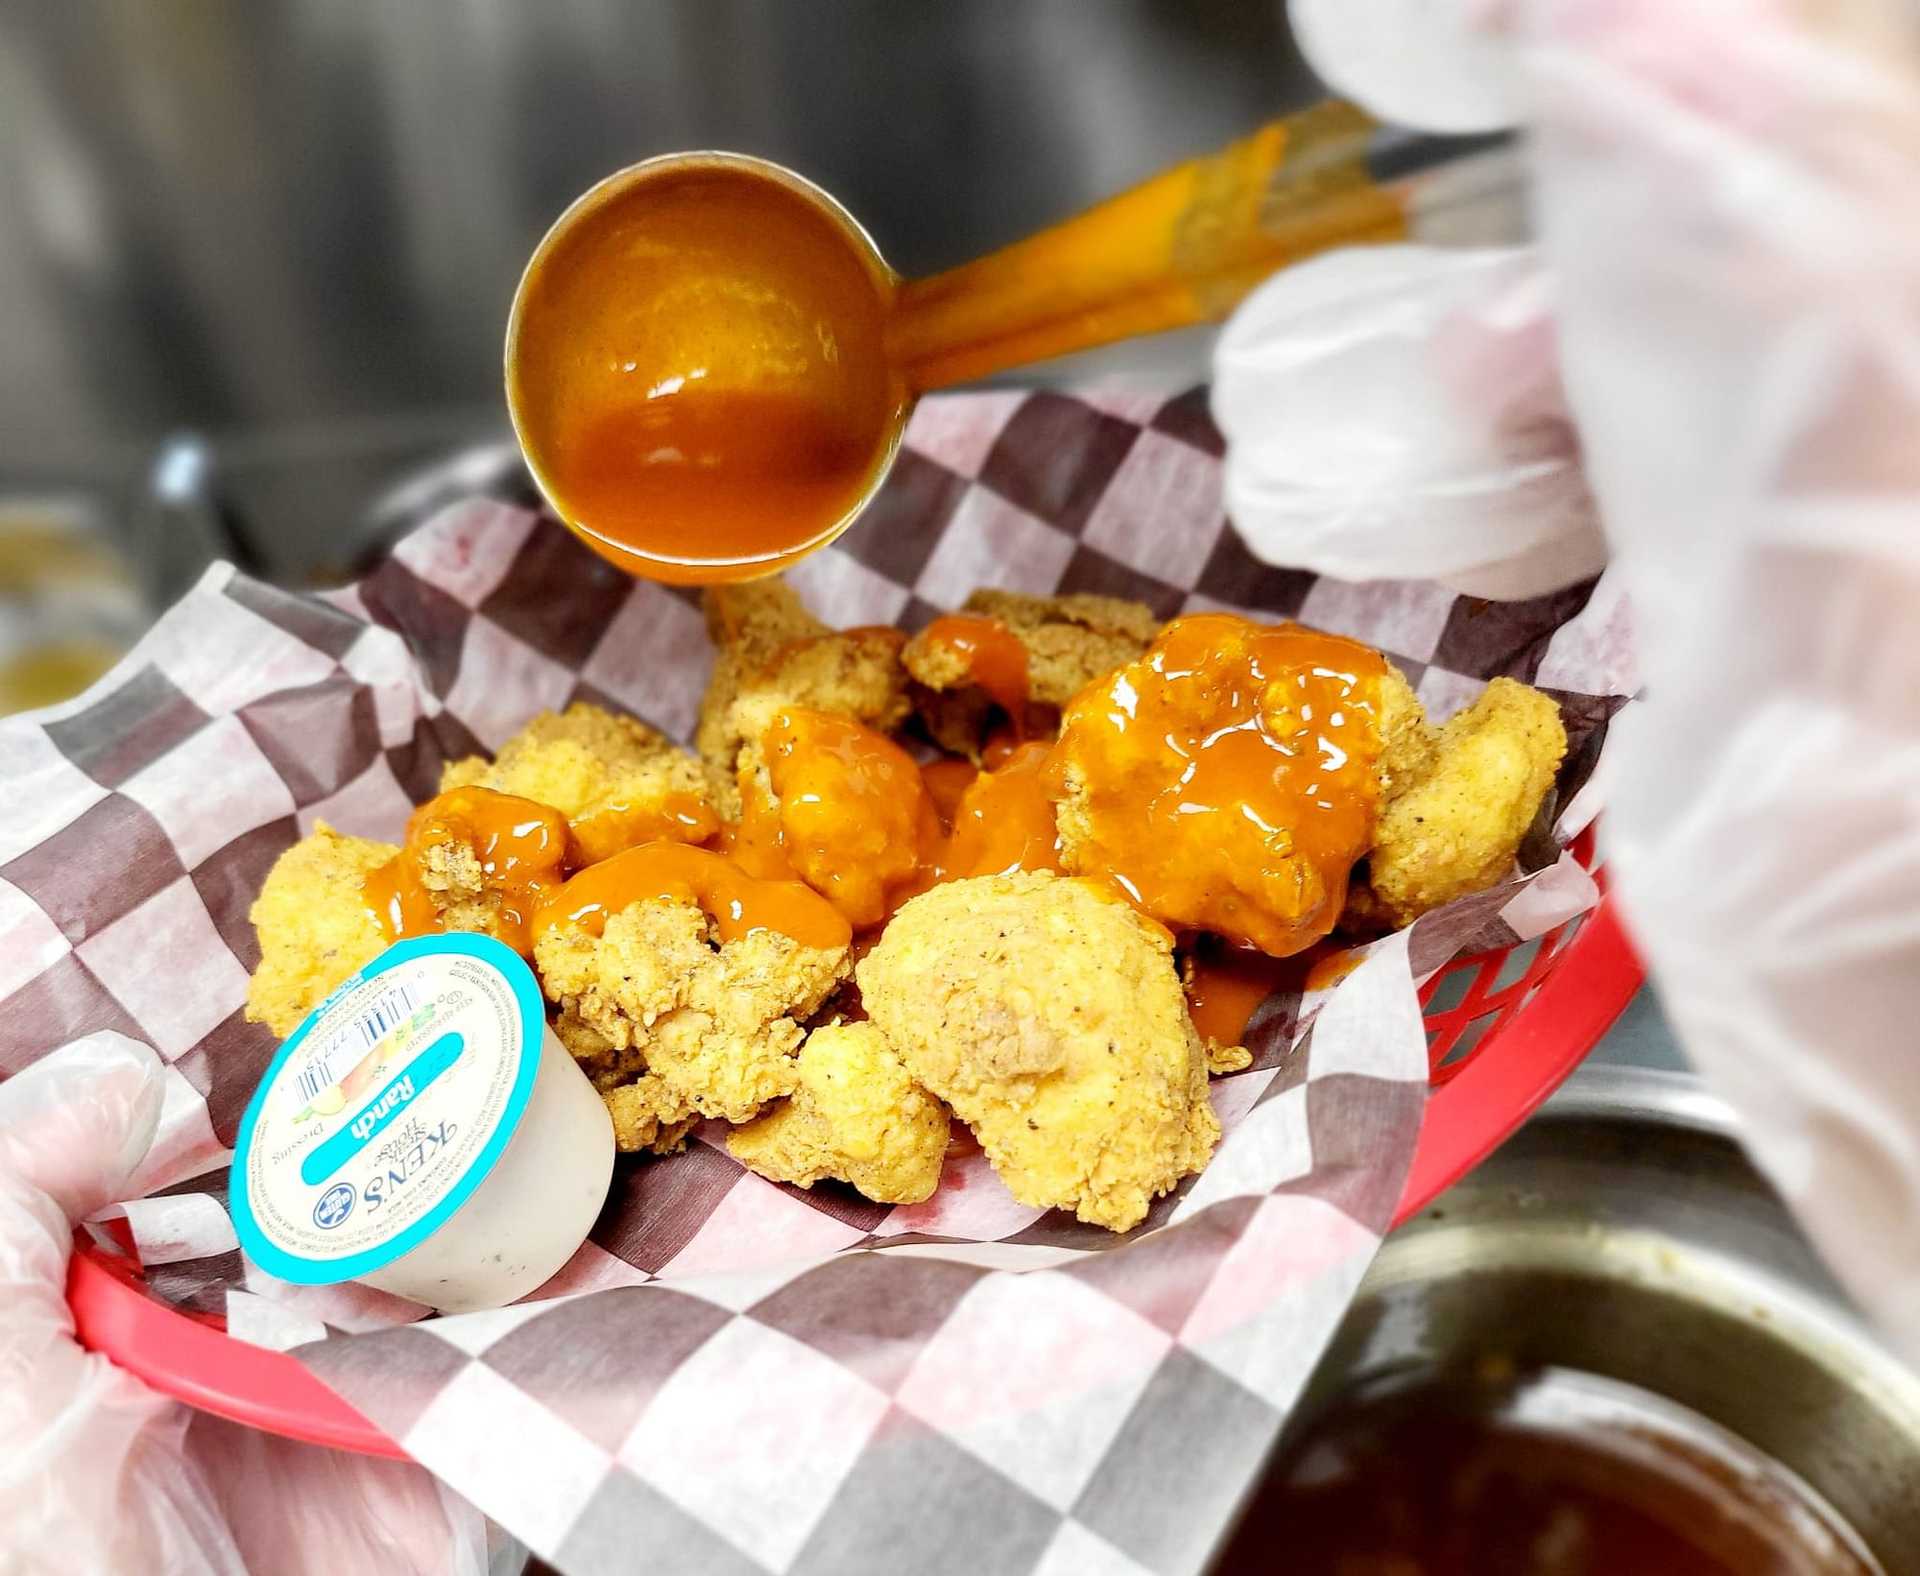 Chicken bites in a basket being drizzled with sauce, served with a side of dipping sauce.